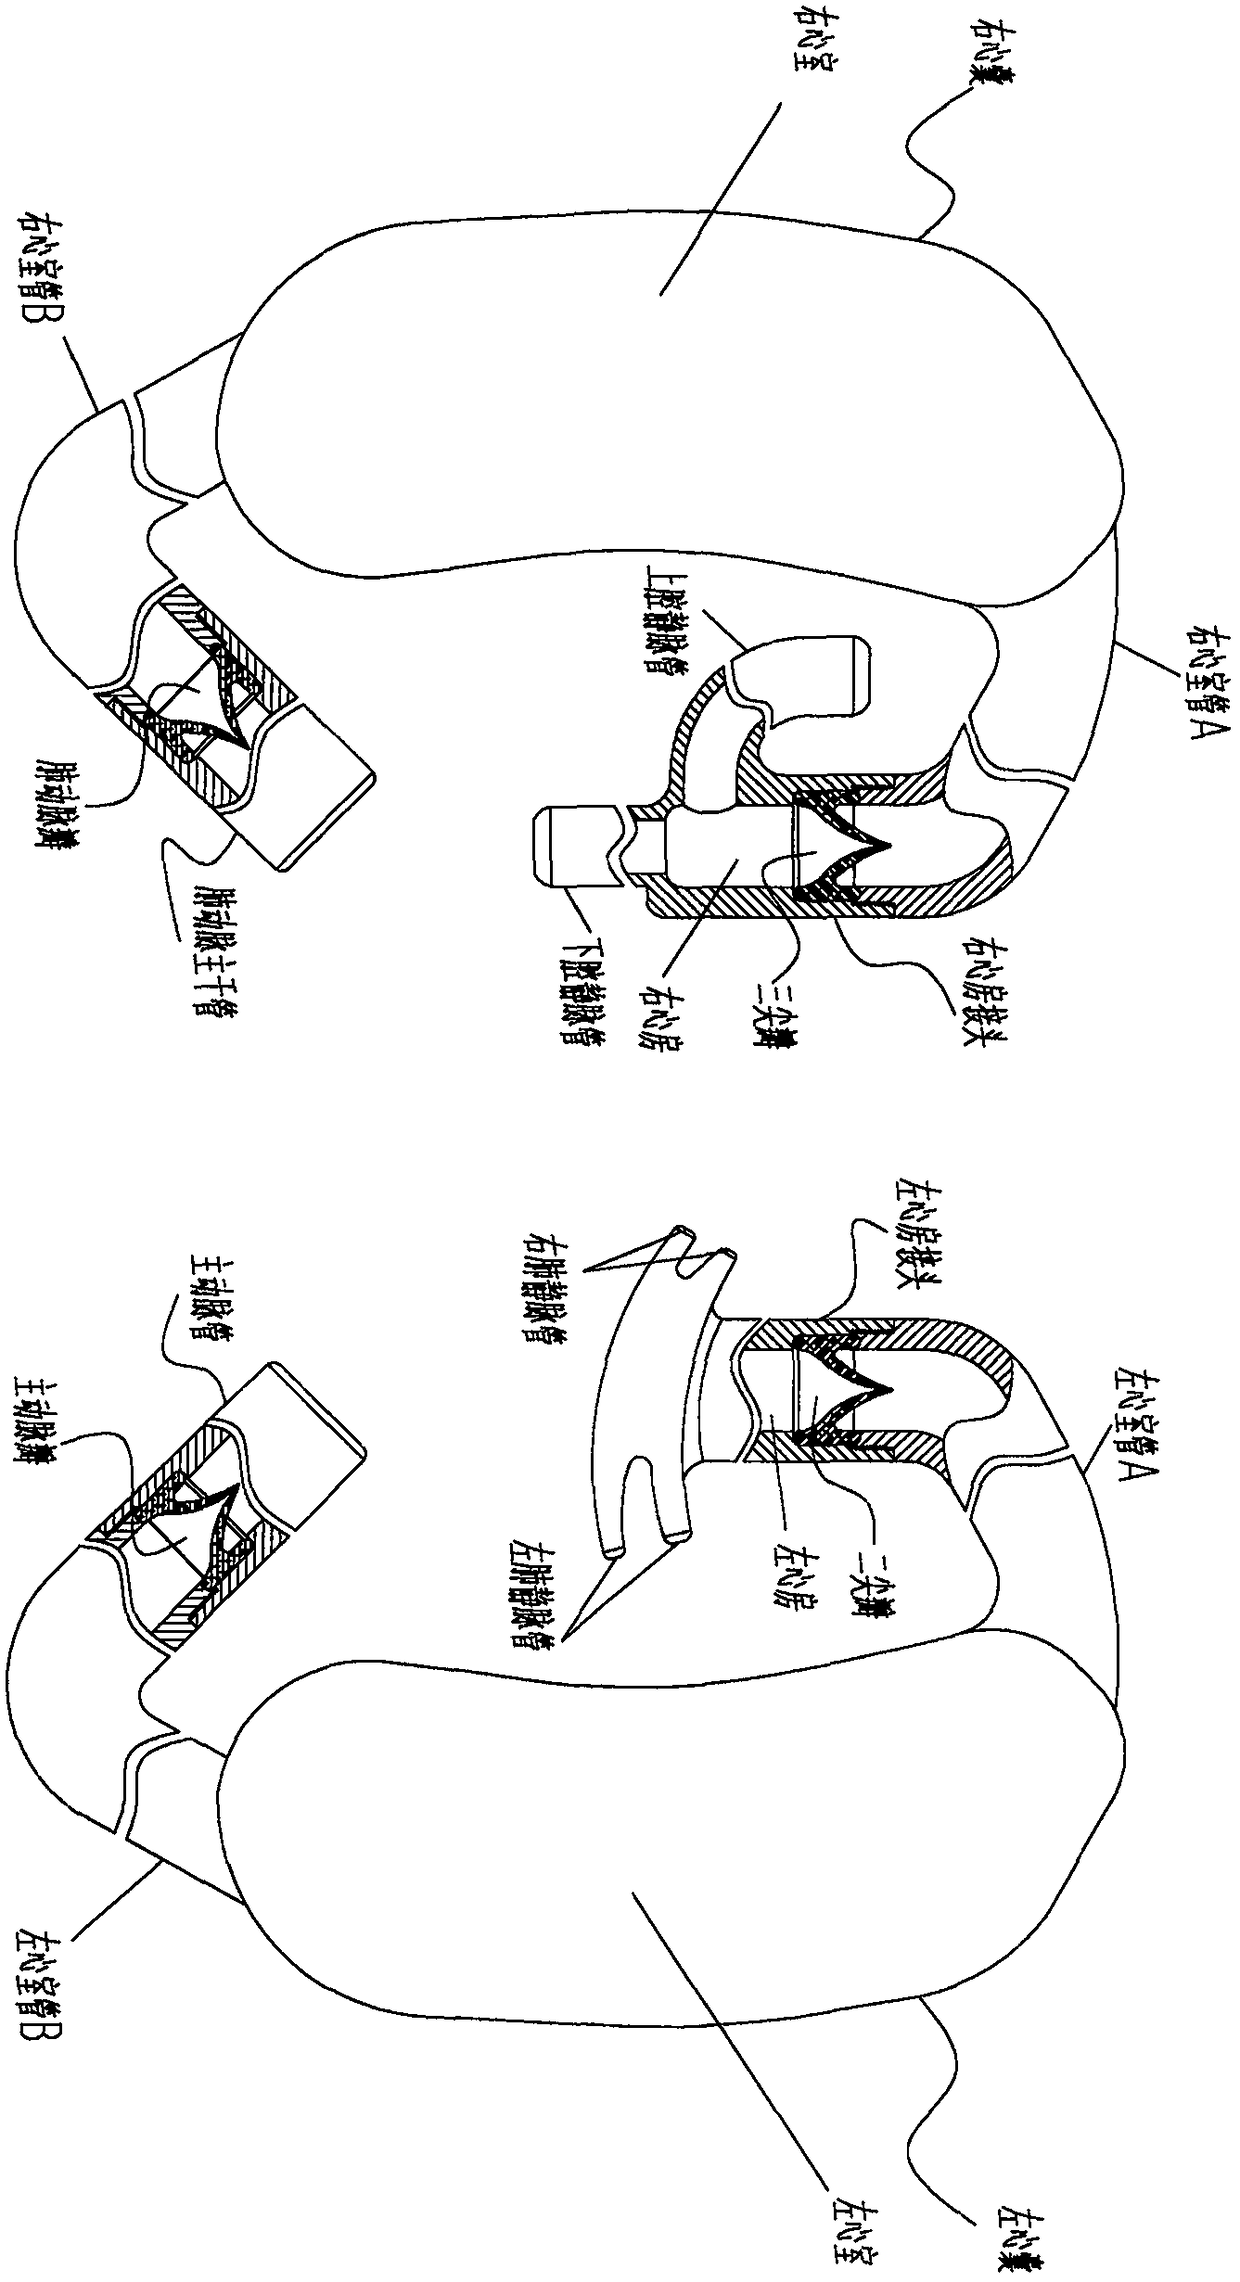 Passive thoracic pressure differential pressure artificial heart and implantation position